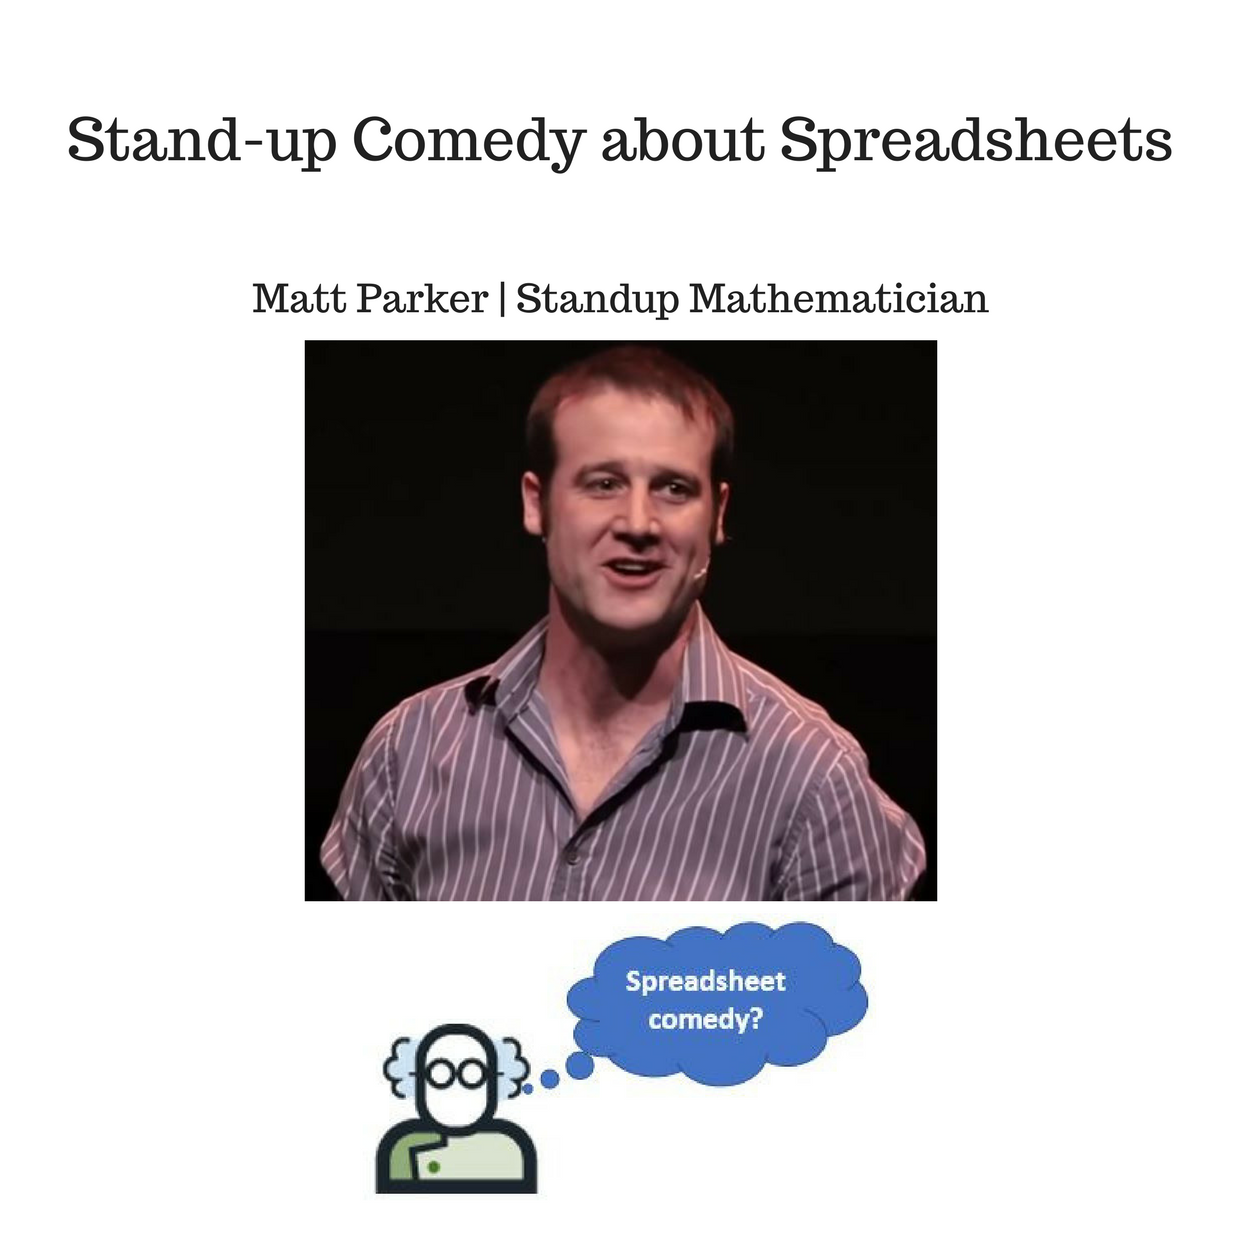 Stand-up comedy about Spreadsheets